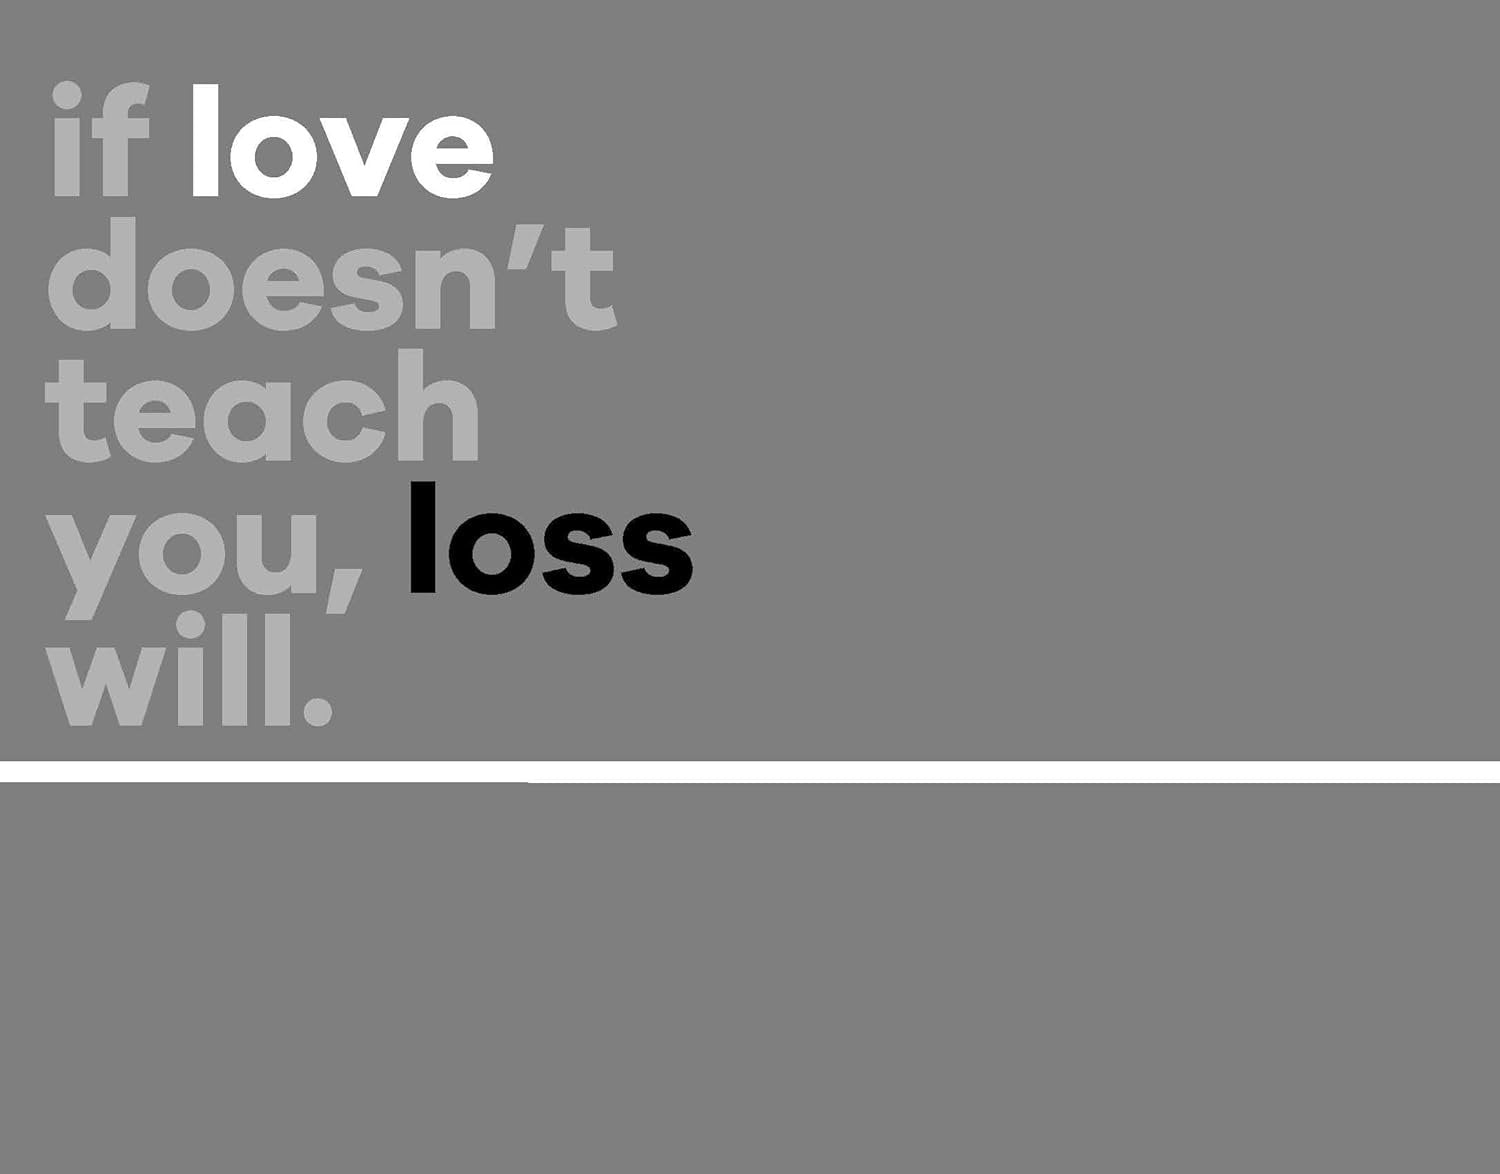 Graphic image with a grey background featuring the white text "if love doesn't teach you, loss will." from the self-help journal "What a Time to Journal: Work Out Why You Are Already Enough" by Chidera Eggerue.